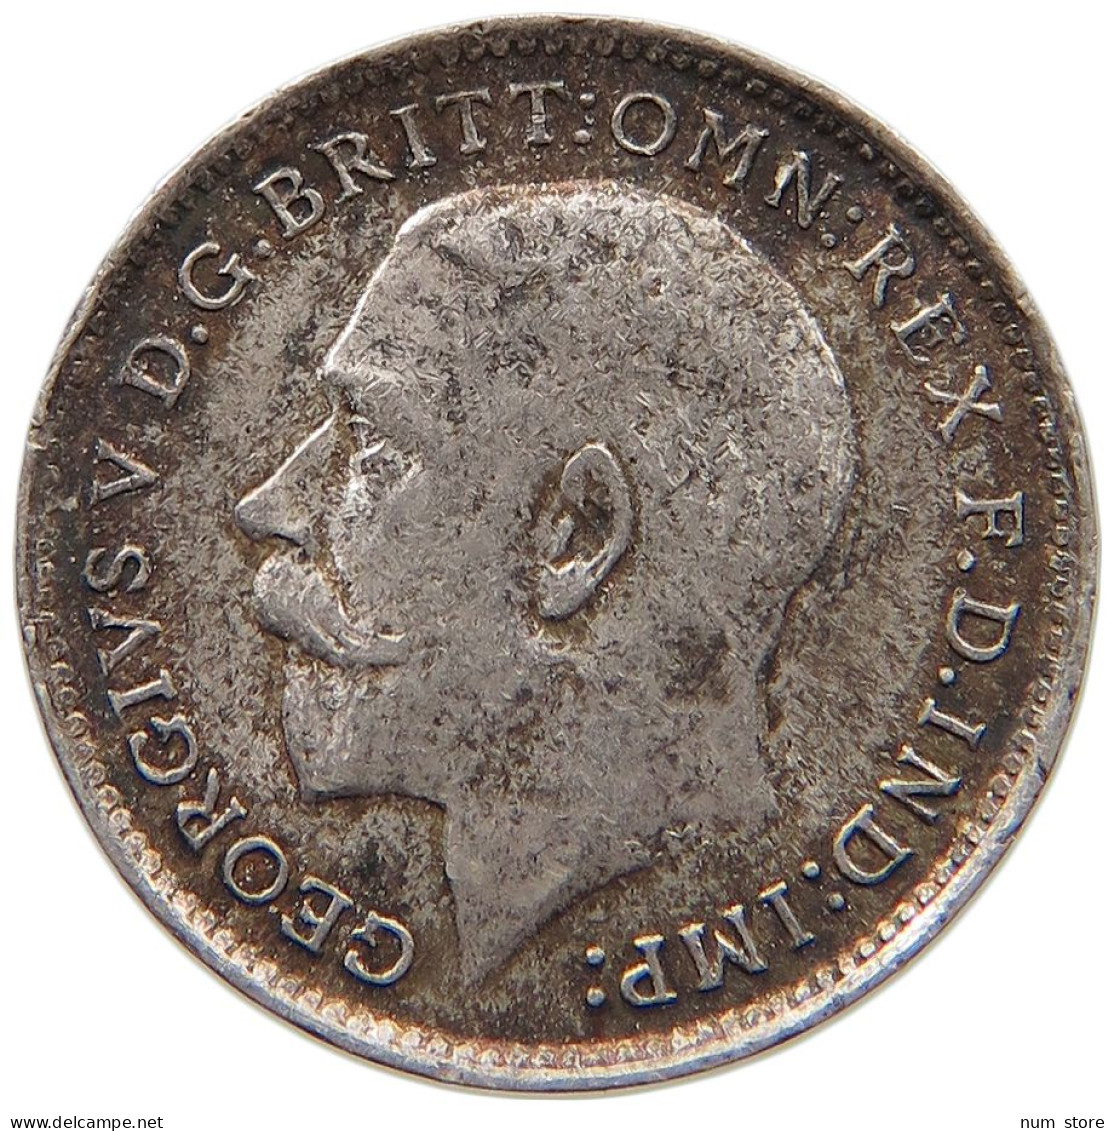 GREAT BRITAIN THREEPENCE 1913 George V. (1910-1936) #c019 0115 - F. 3 Pence